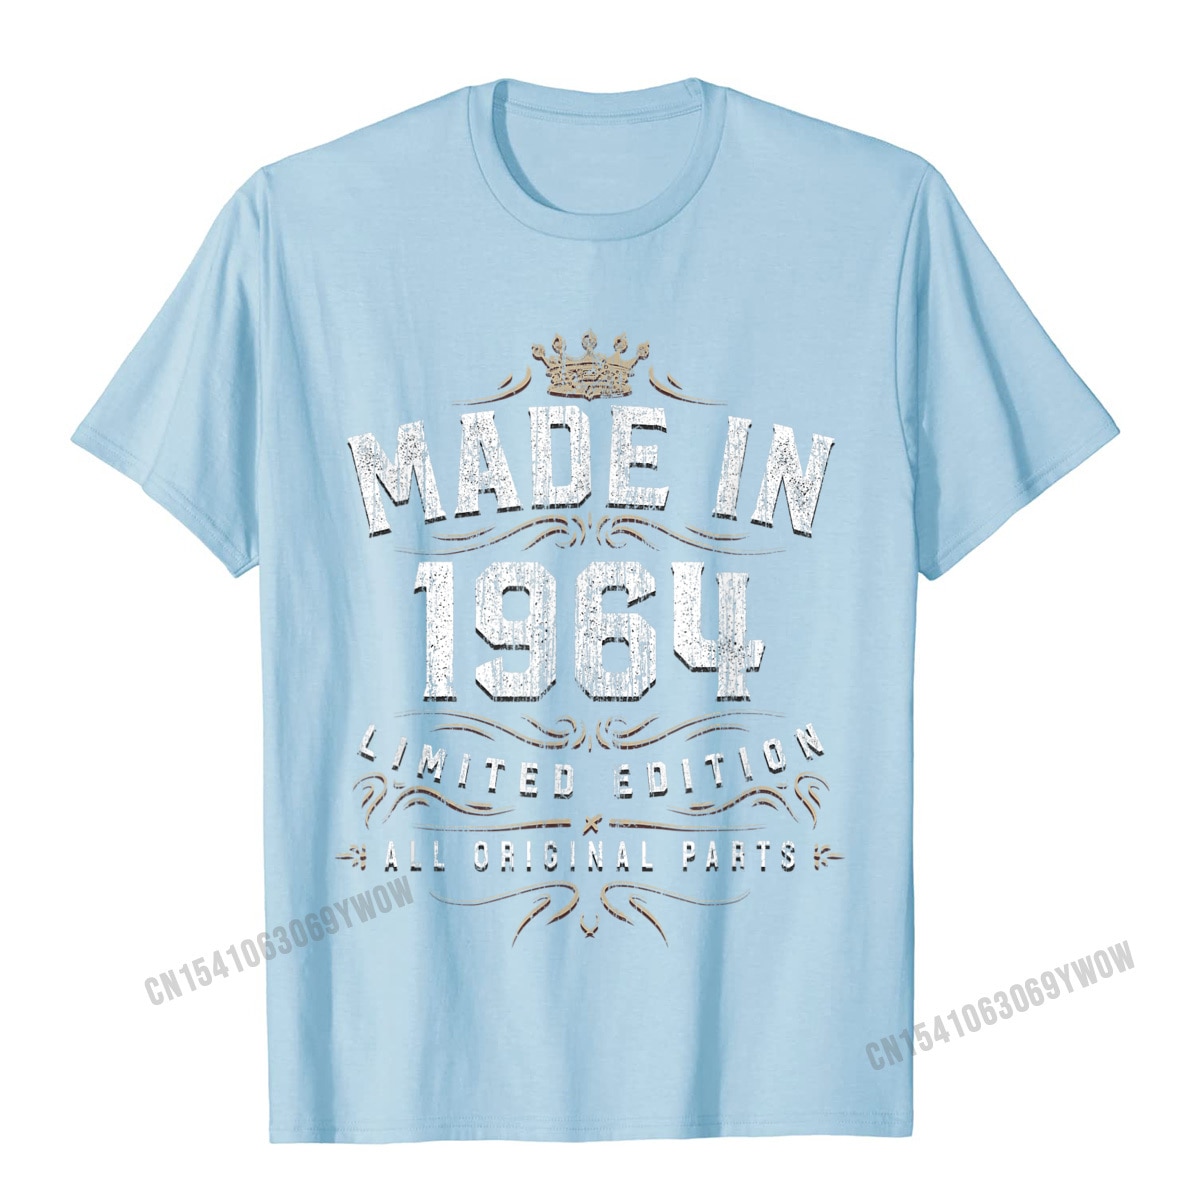 Camisa Family T Shirt for Men Cotton Fabric Father Day Tops Shirt Simple Style Tops & Tees Short Sleeve Prevalent Round Collar Made In 1964 Shirt Birthday 55 Limited Edition Image Gifts__994 light